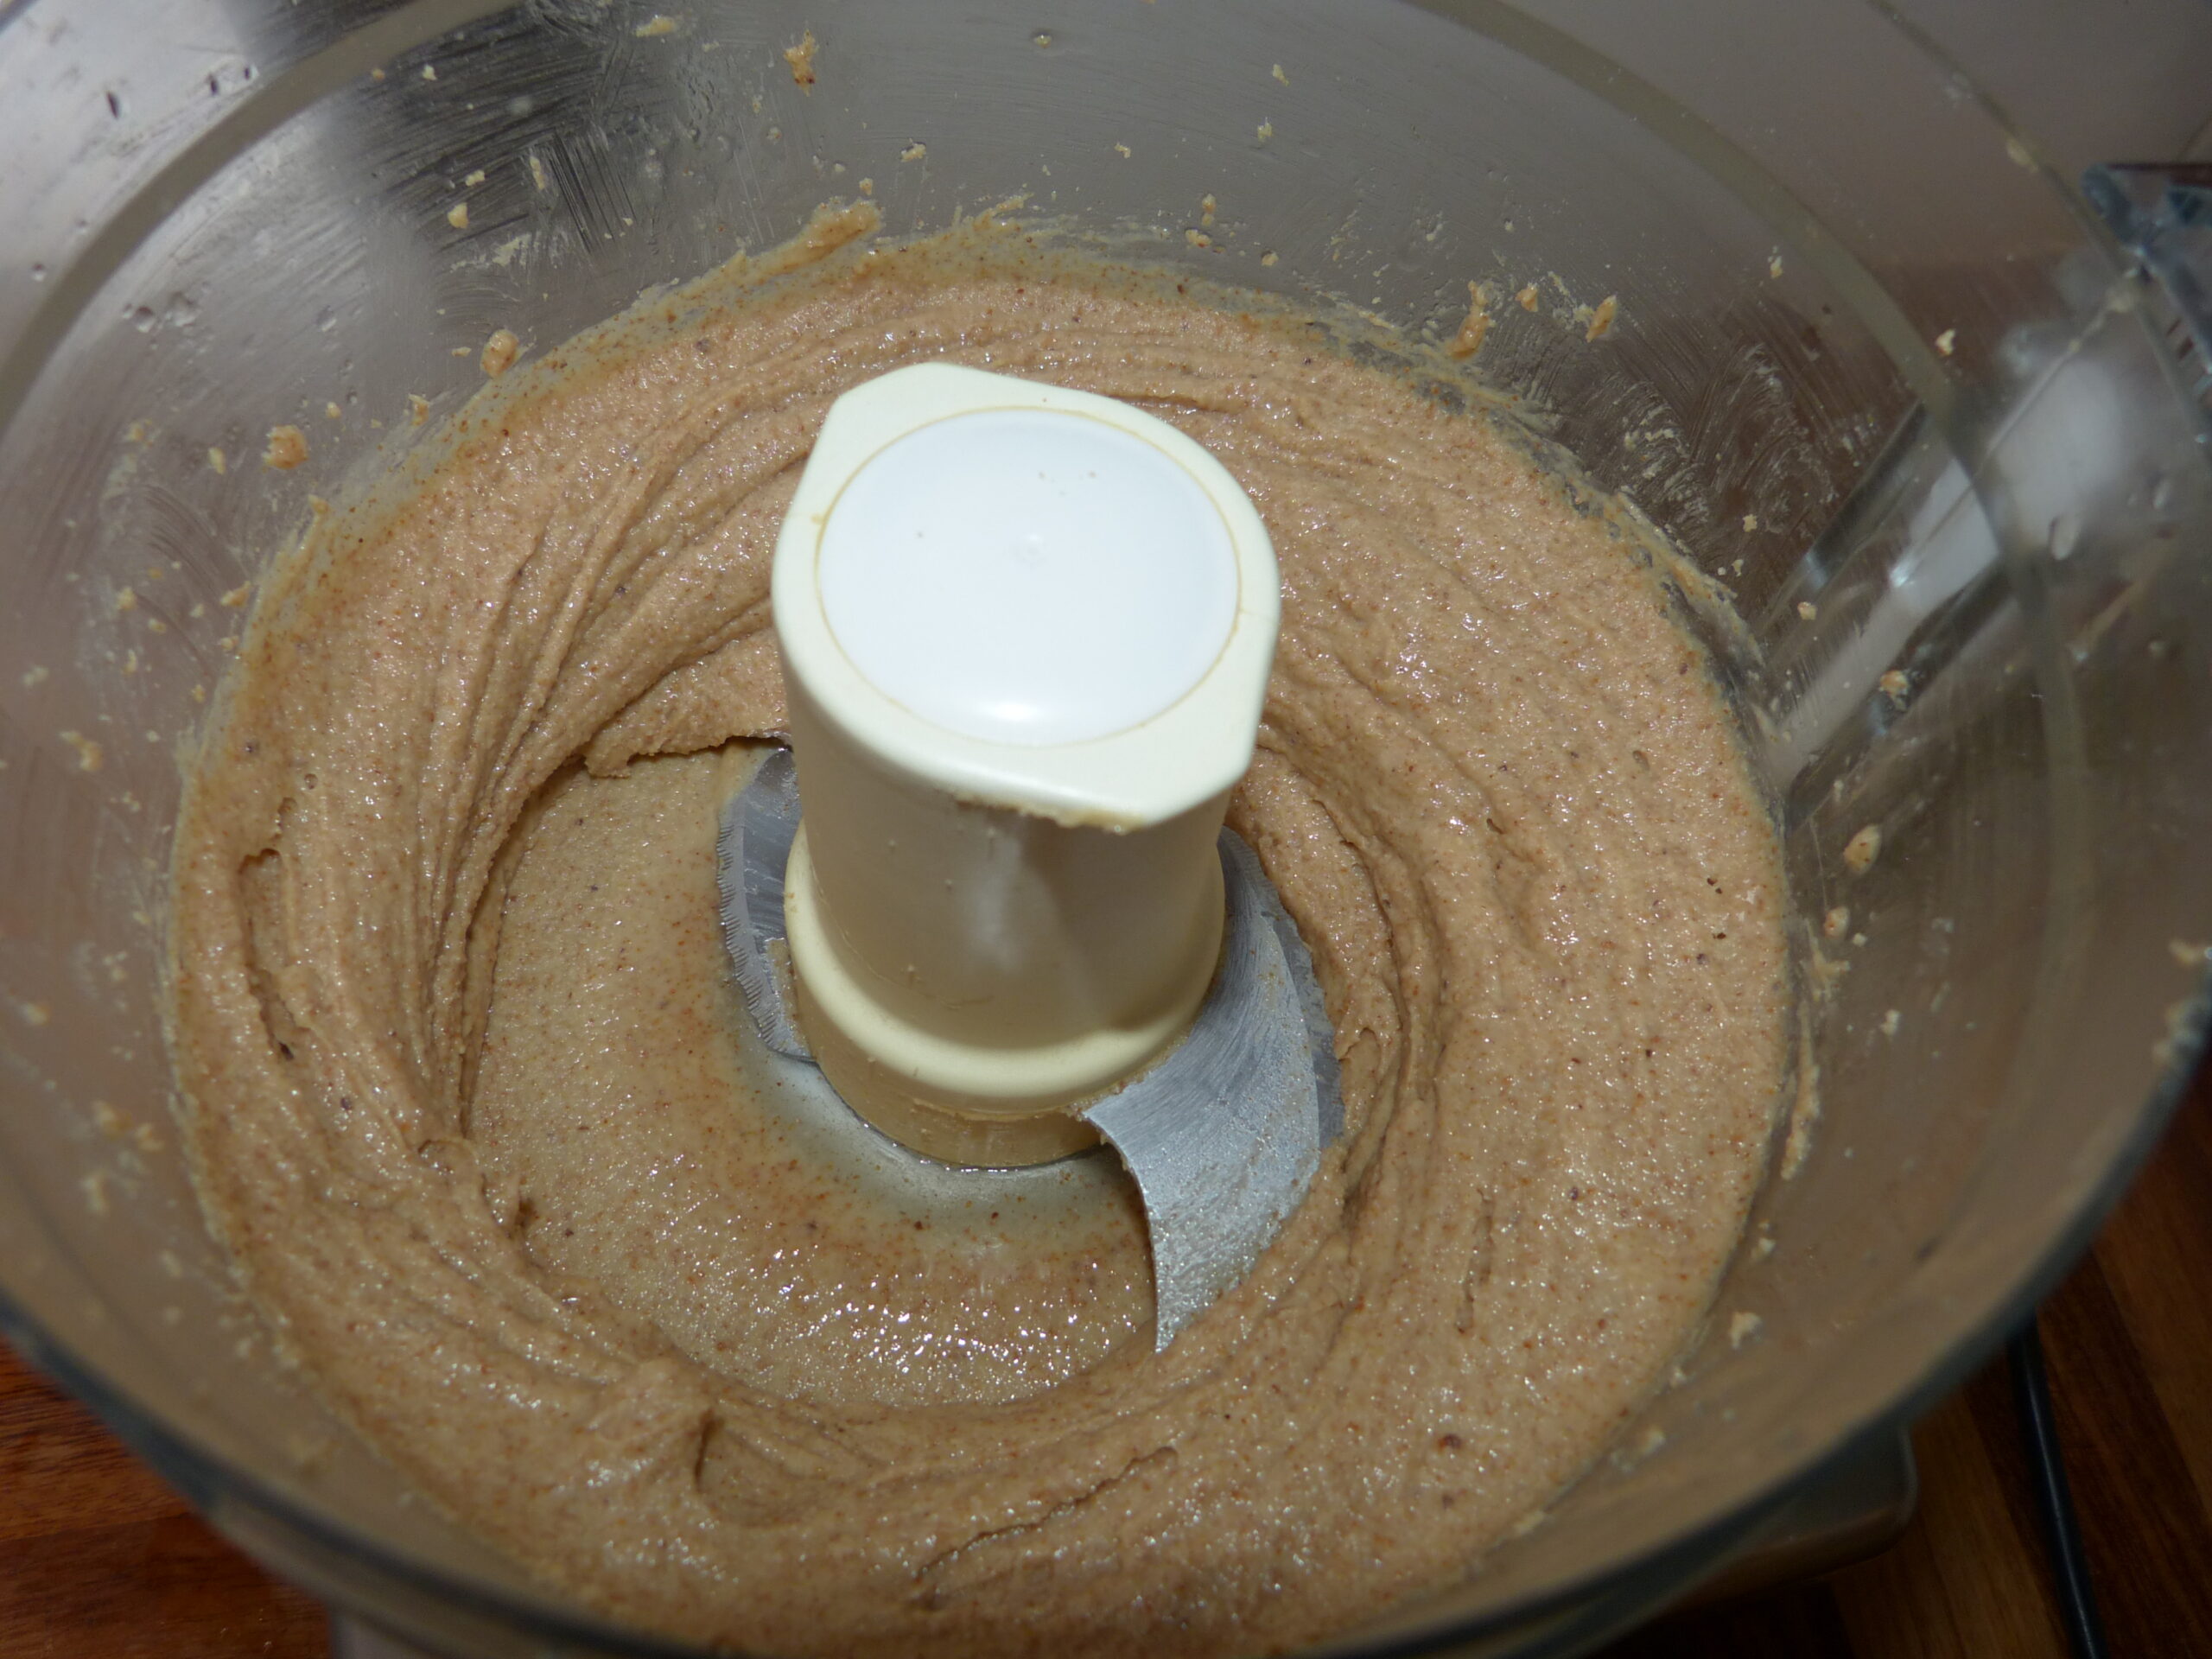 Almond butter - after adding oil